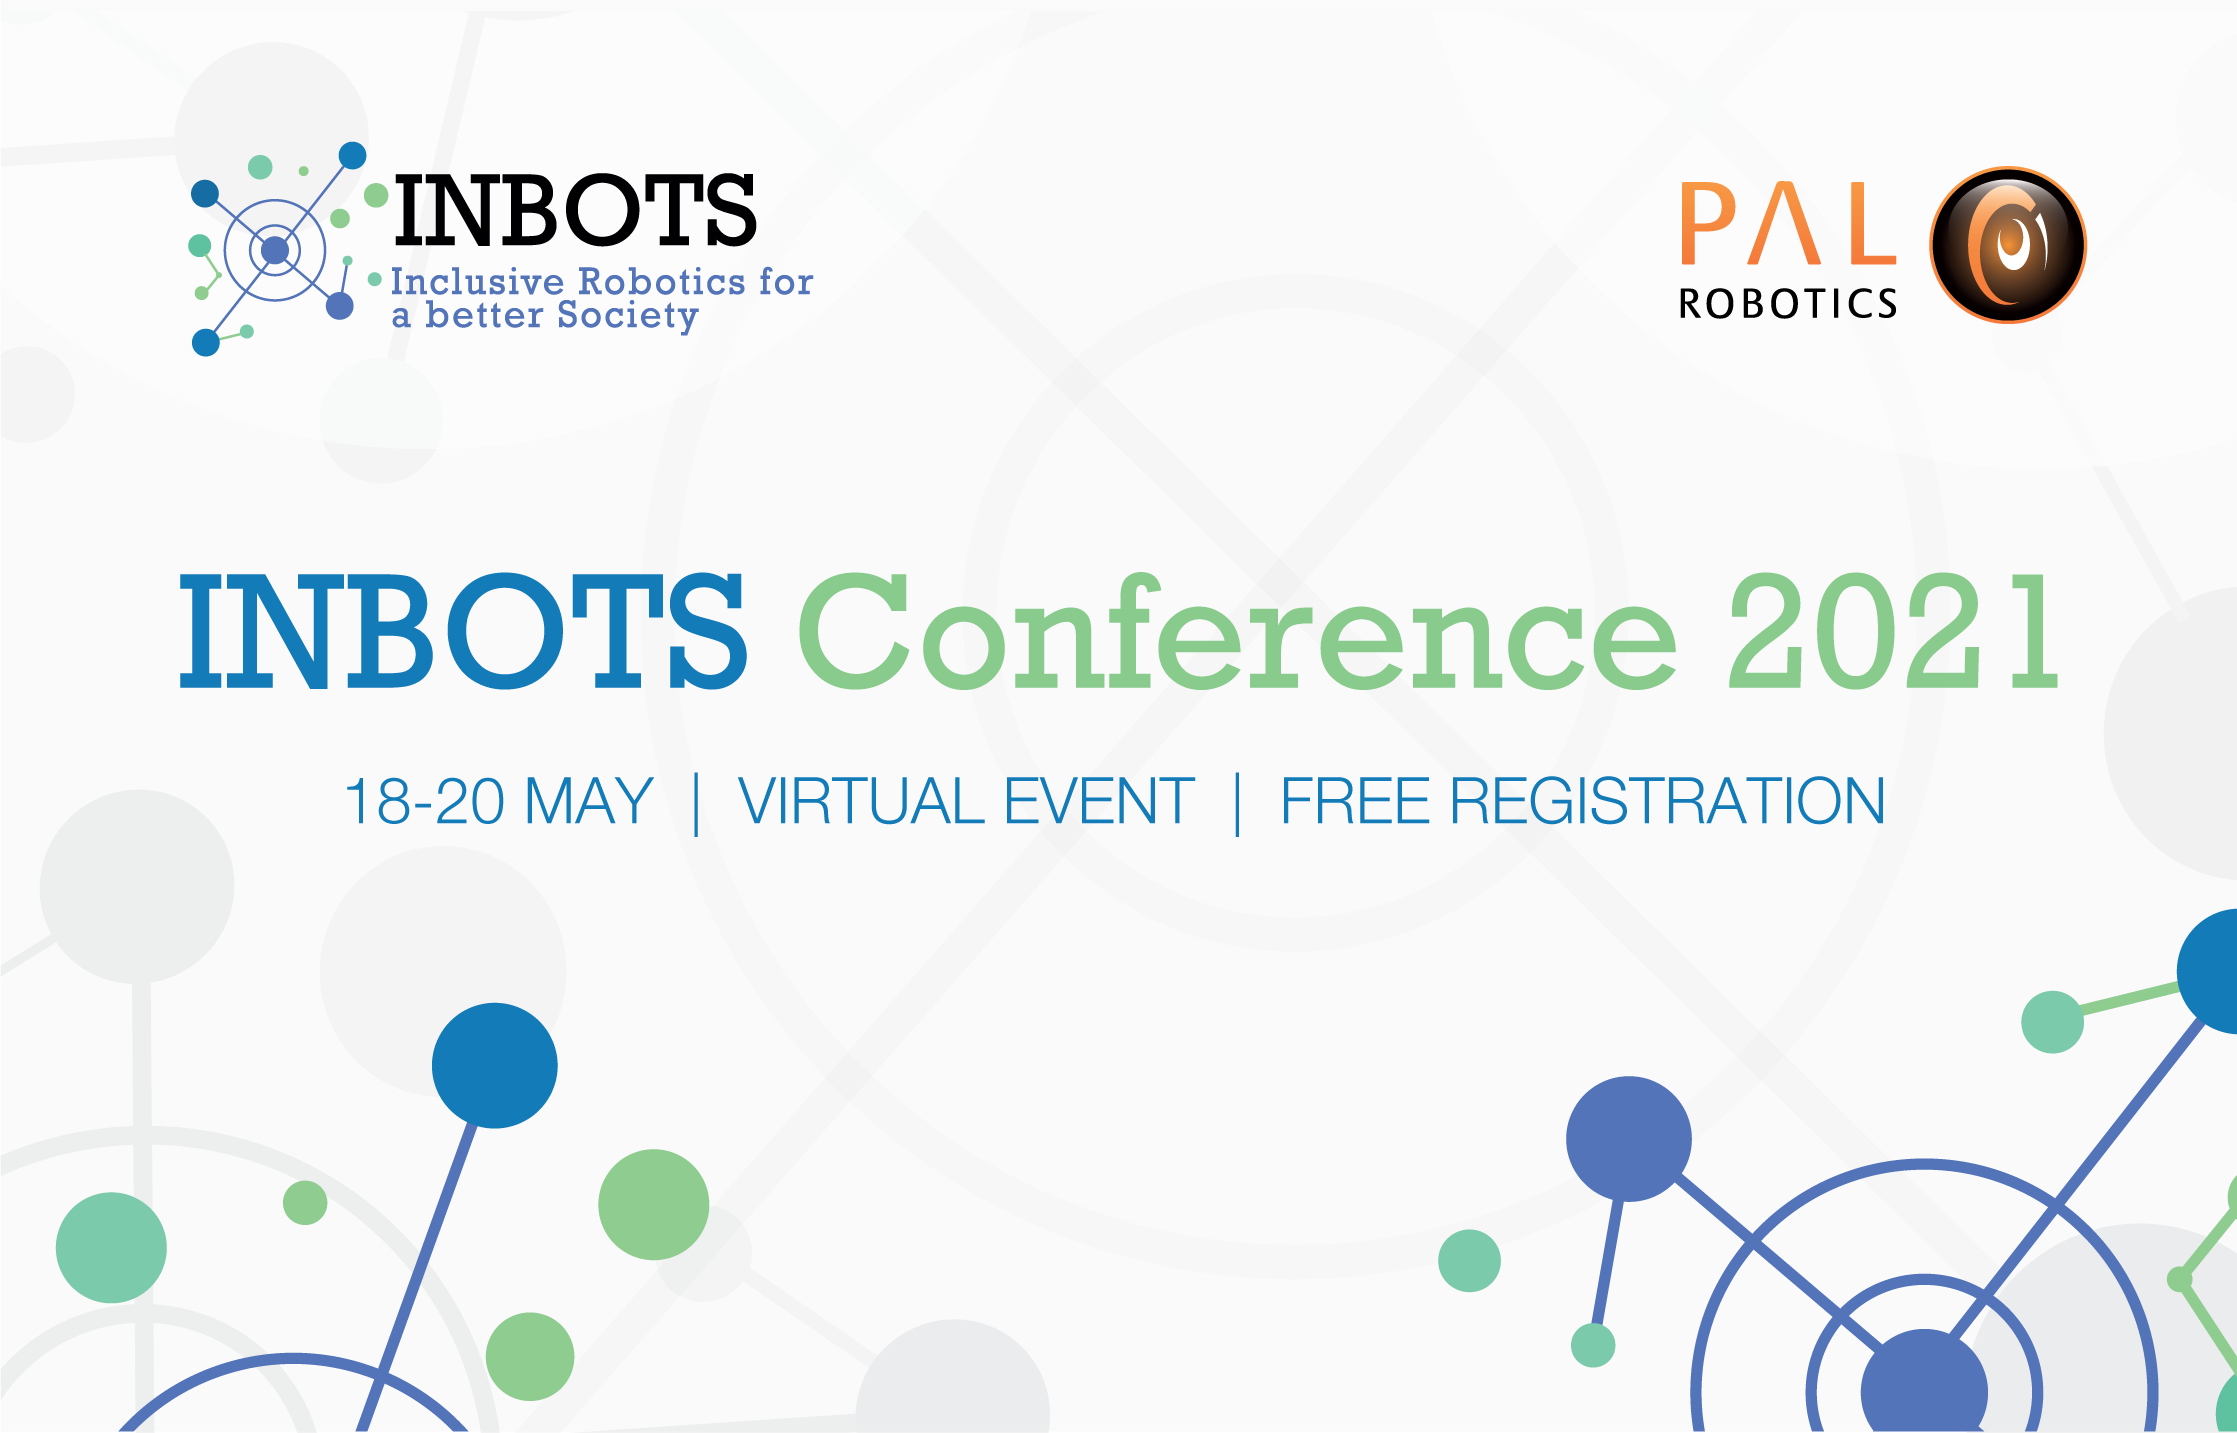 EU Project INBOTS conference with PAL Robotics and many important stakeholders in the field of robotics to discuss and promote the acceptance of robots in the society.